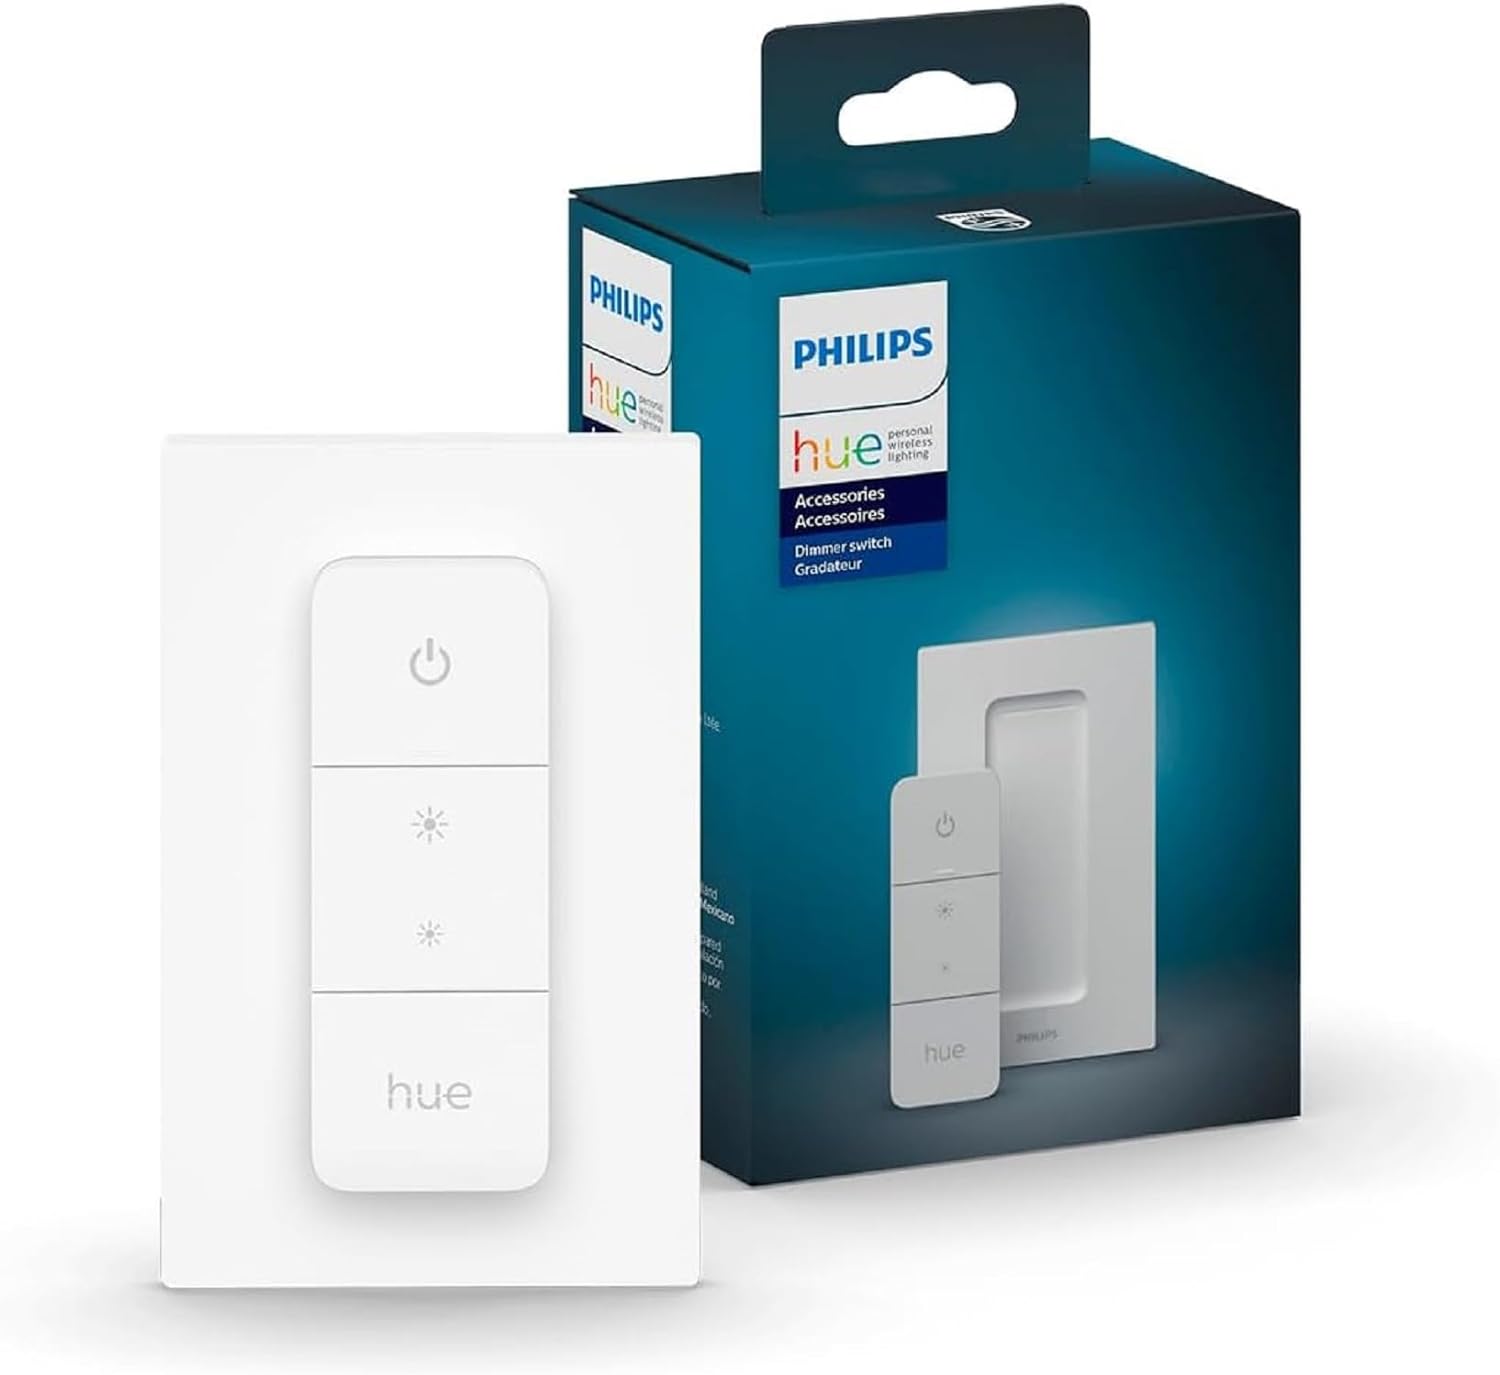 Philips hue smart dimmer switch